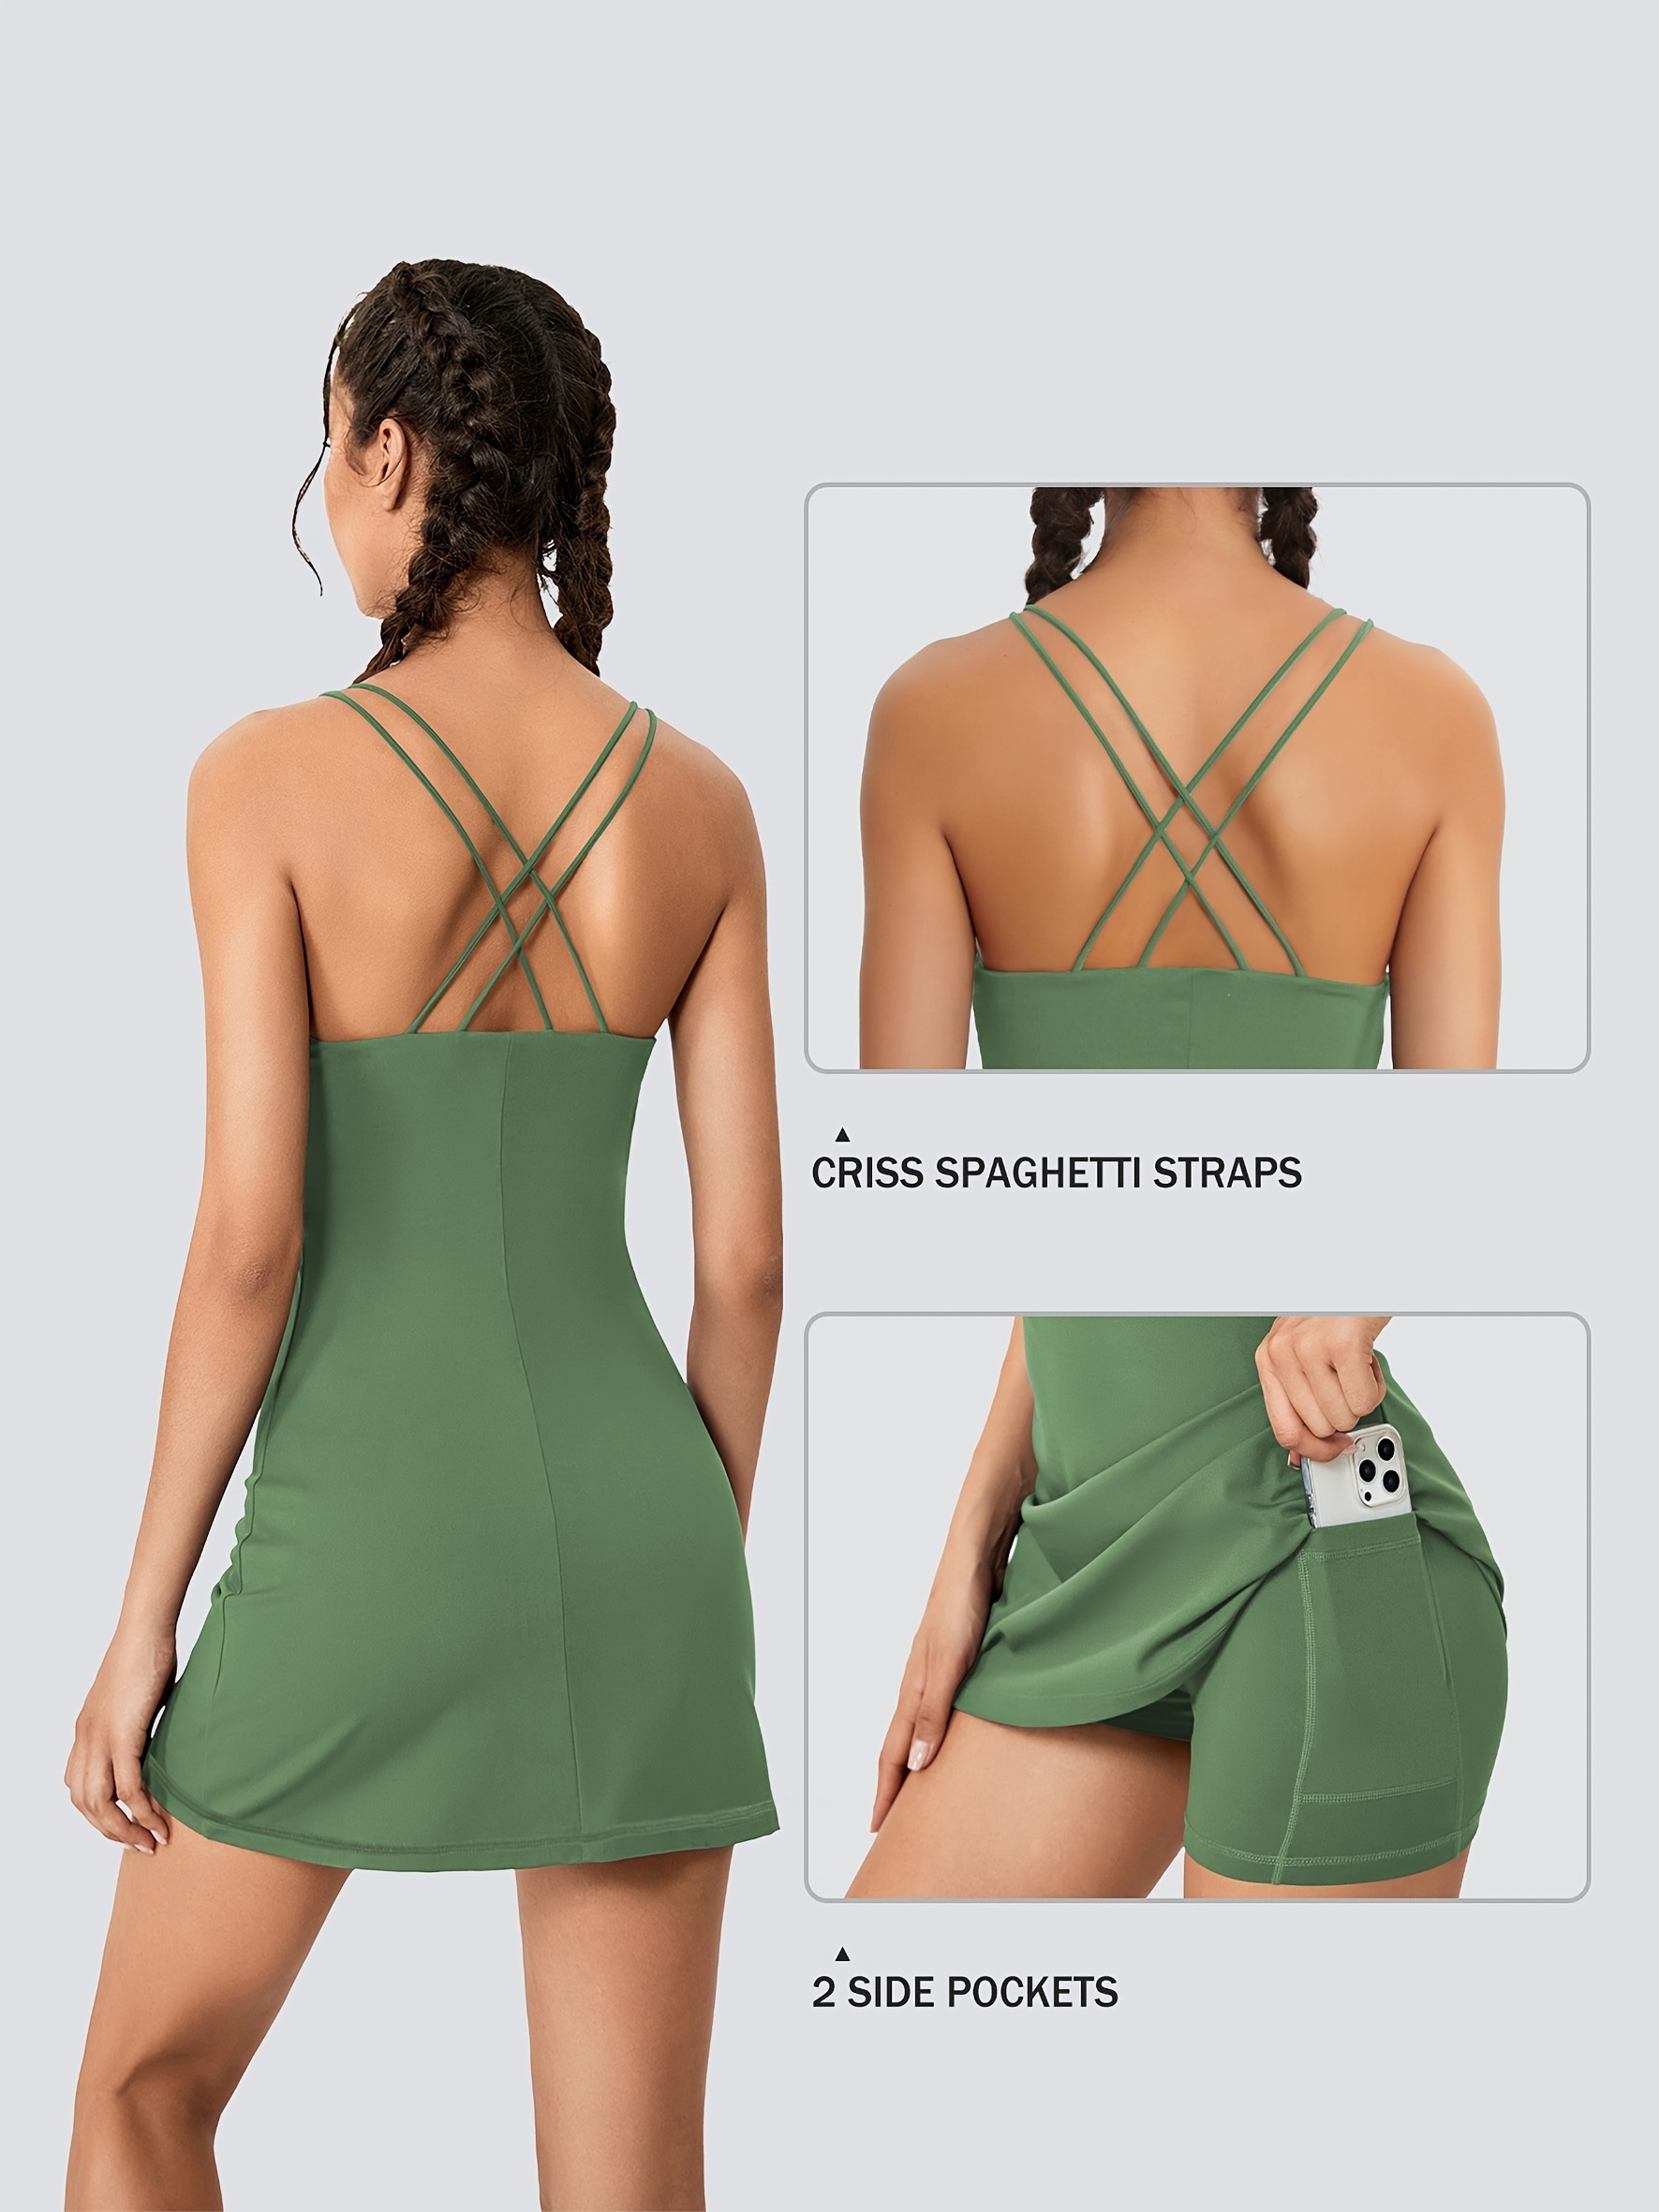 Tennis Dress for Women Workout Dress with Built-in Bra & Shorts Pockets  Athletic Dress for Exercise Golf Dresses 